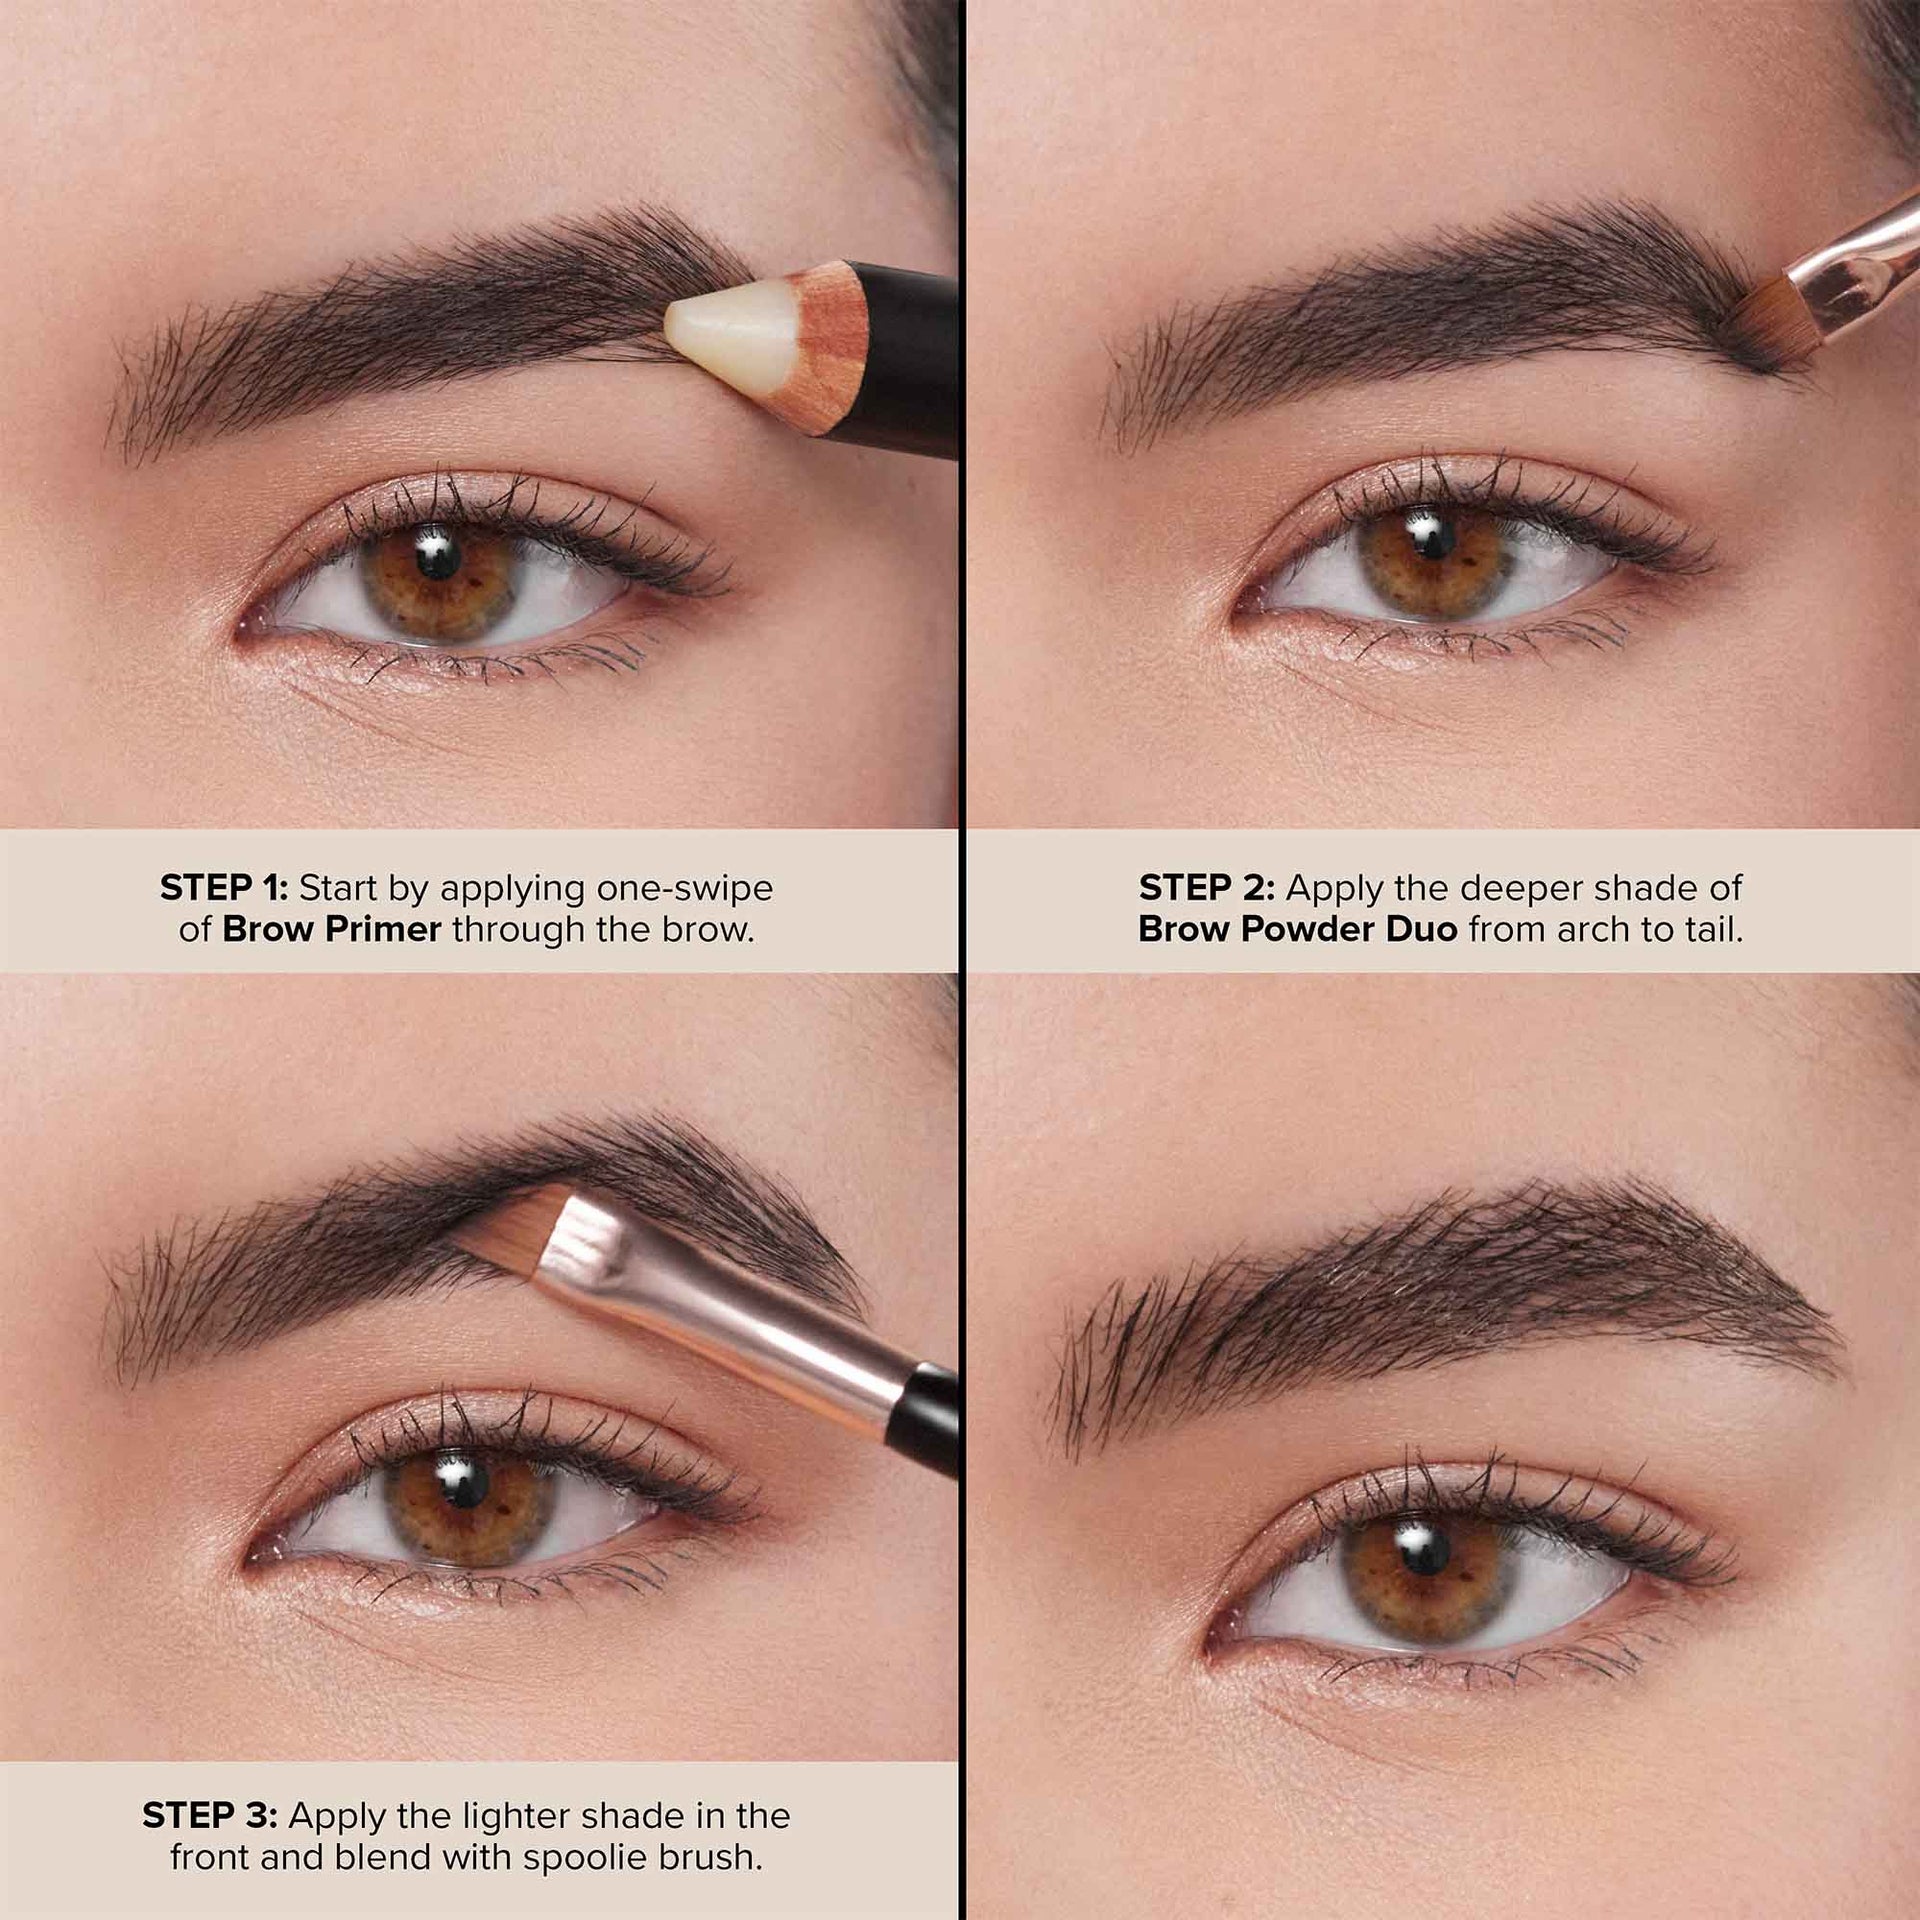 How To Brow Powder Duo